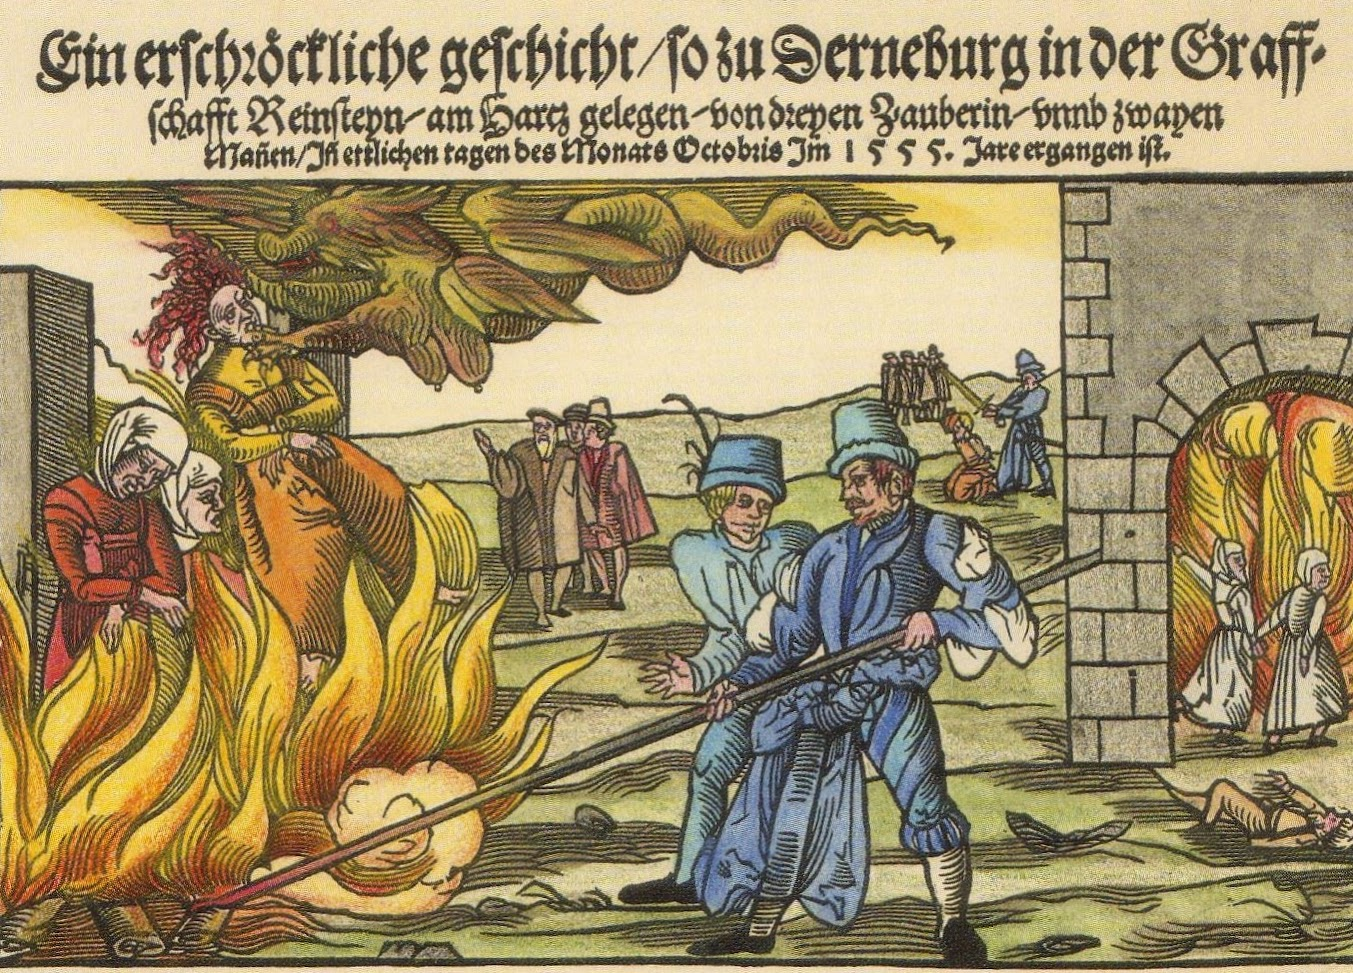 An engraving of a woman being burned alive